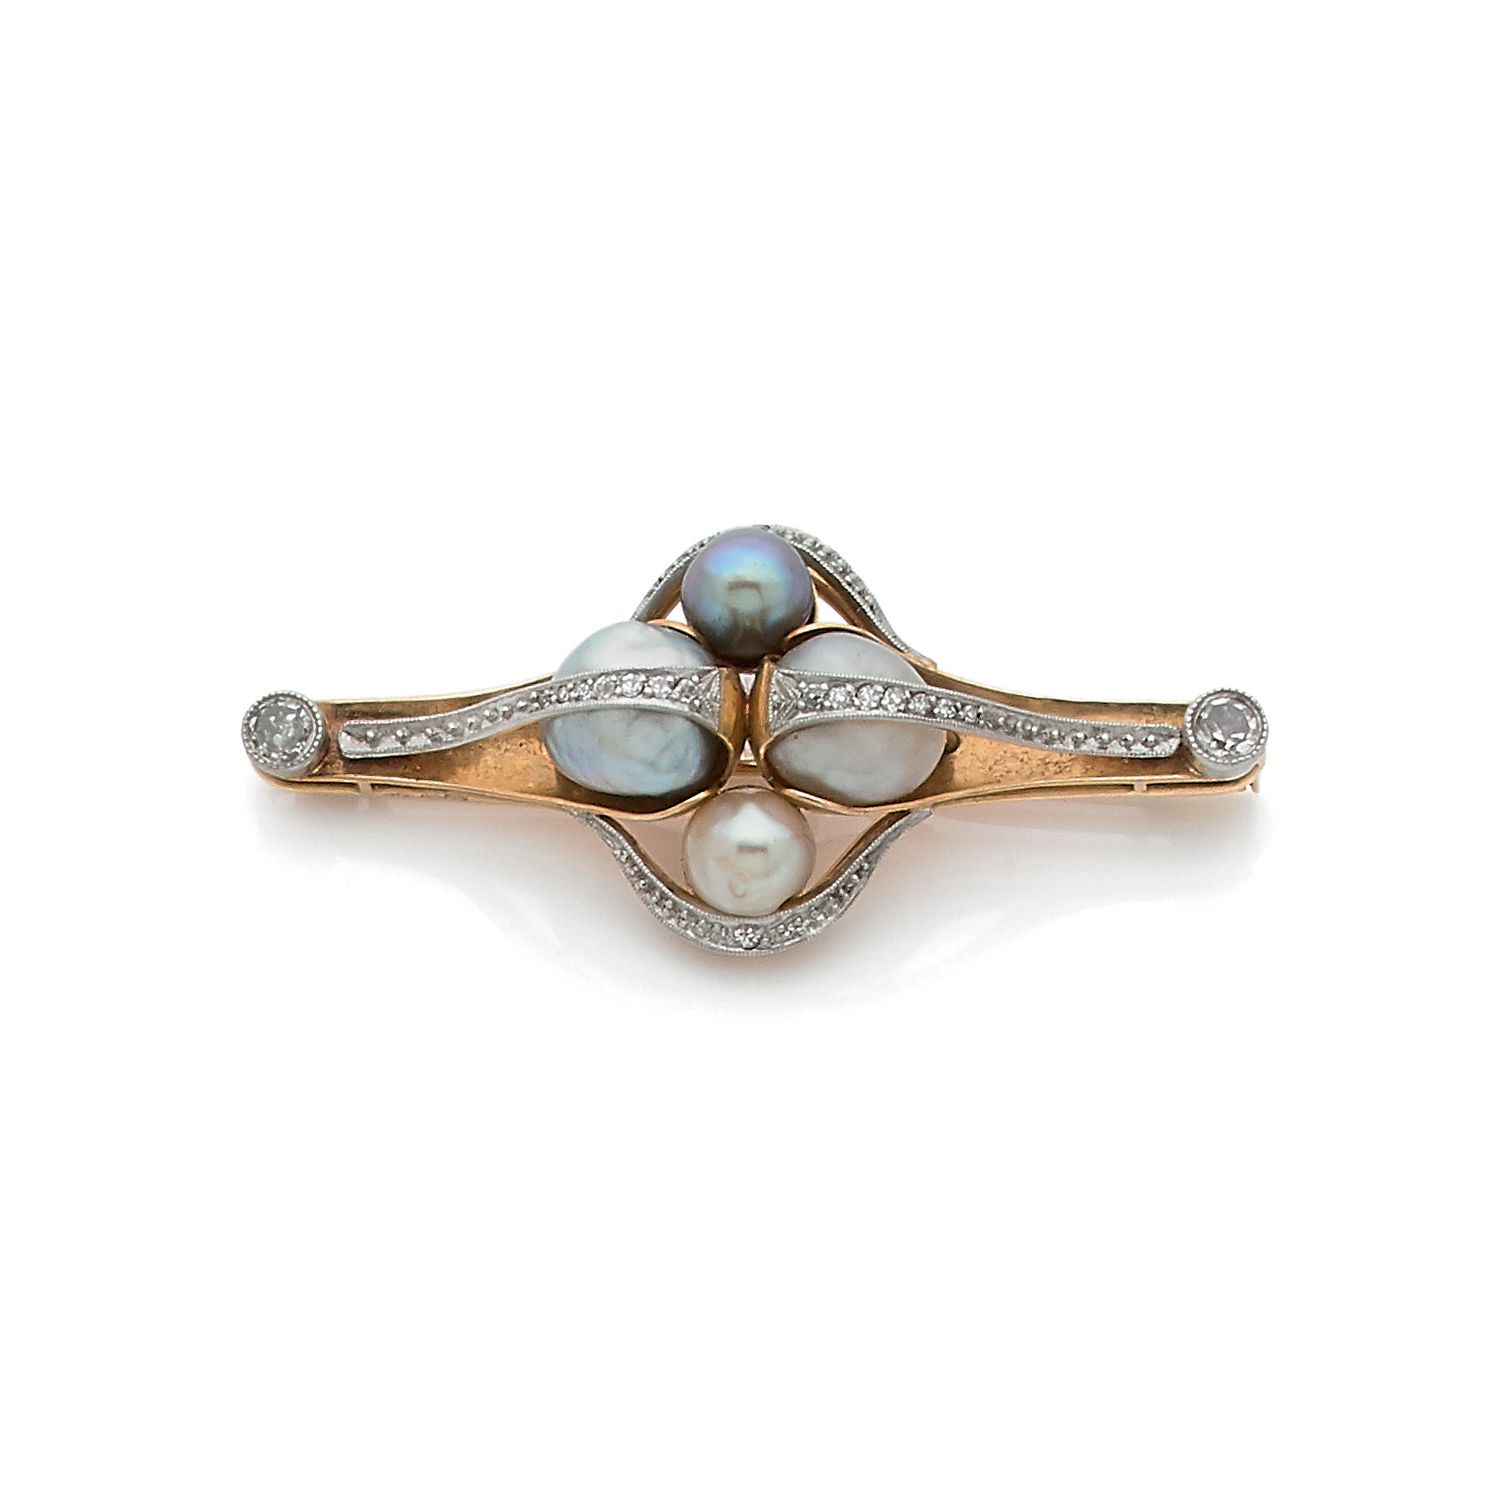 Null French production from 1920-25

Bar brooch in 18K yellow gold (750‰) and pl&hellip;